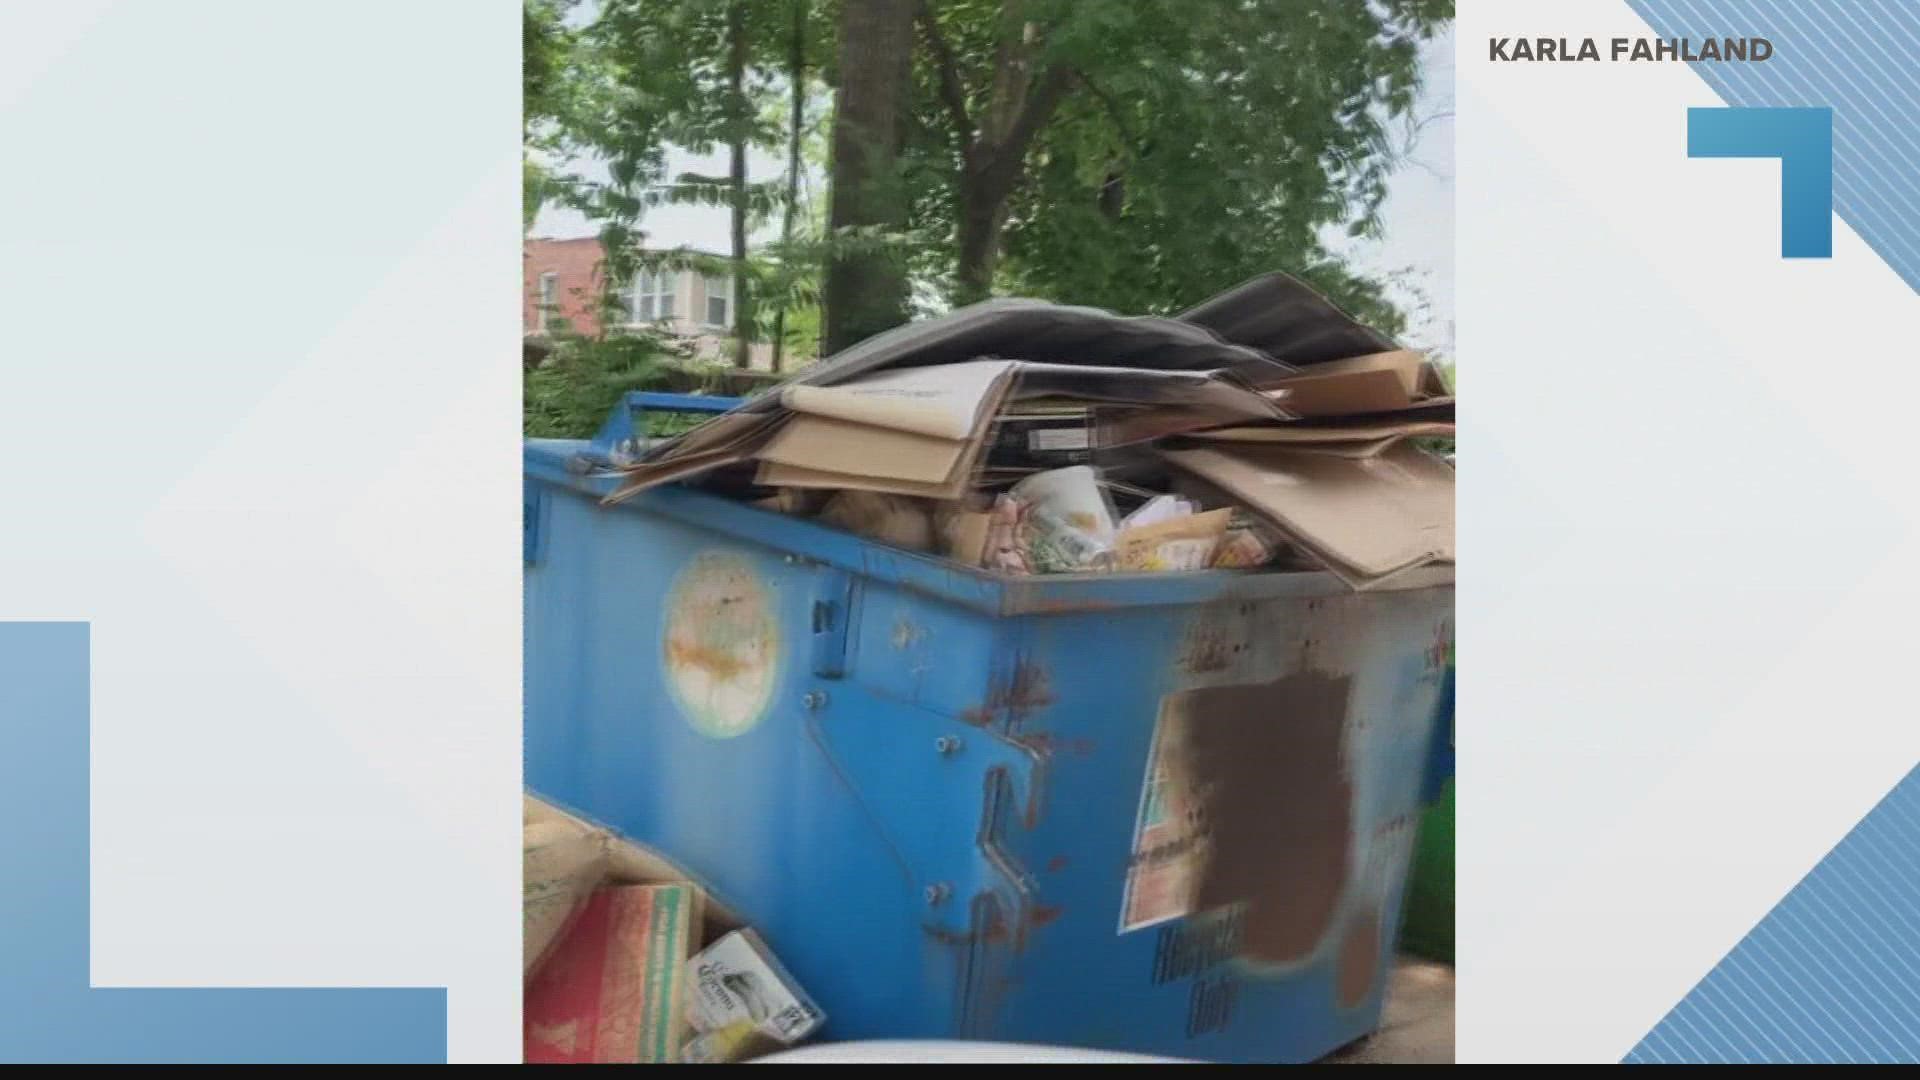 Many city trash cans were filled with weeks of garbage during the day on Friday.